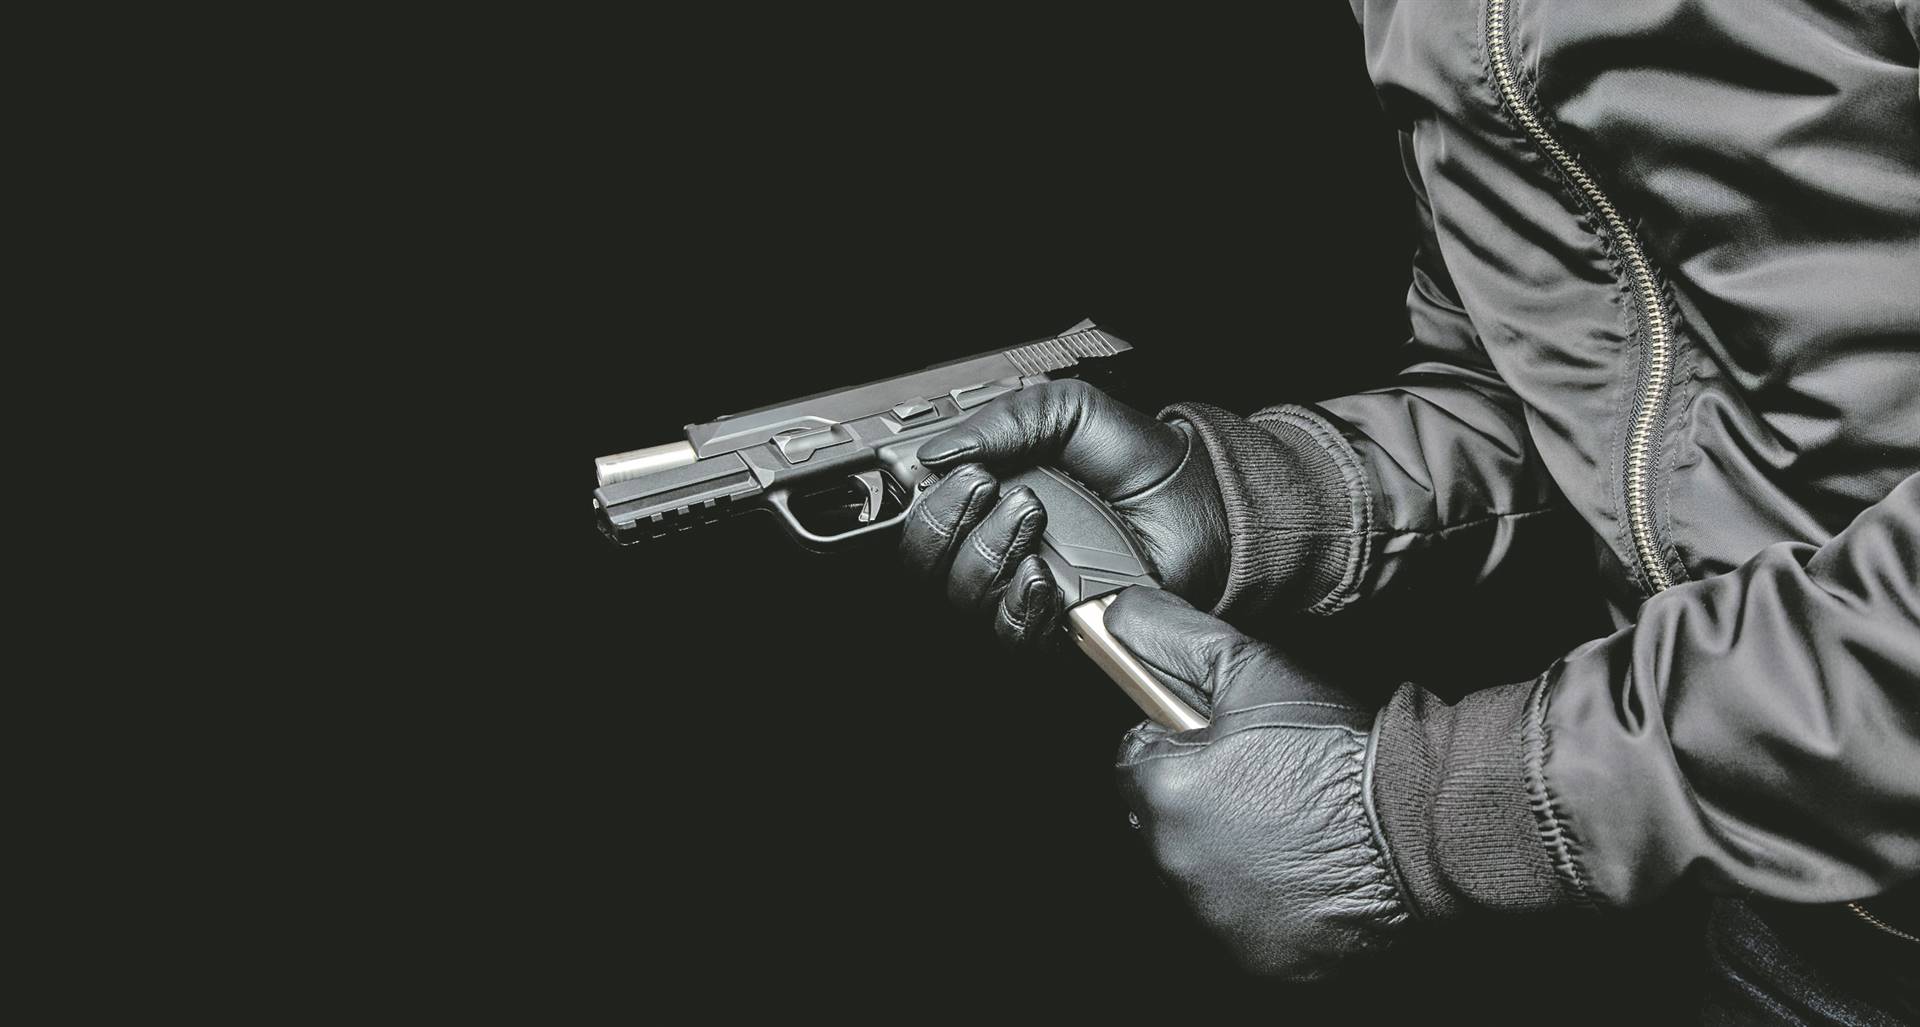 News24 | Eskom ‘hitman’ allegedly offered R400 000 to kill former employee arrested after deadly heist